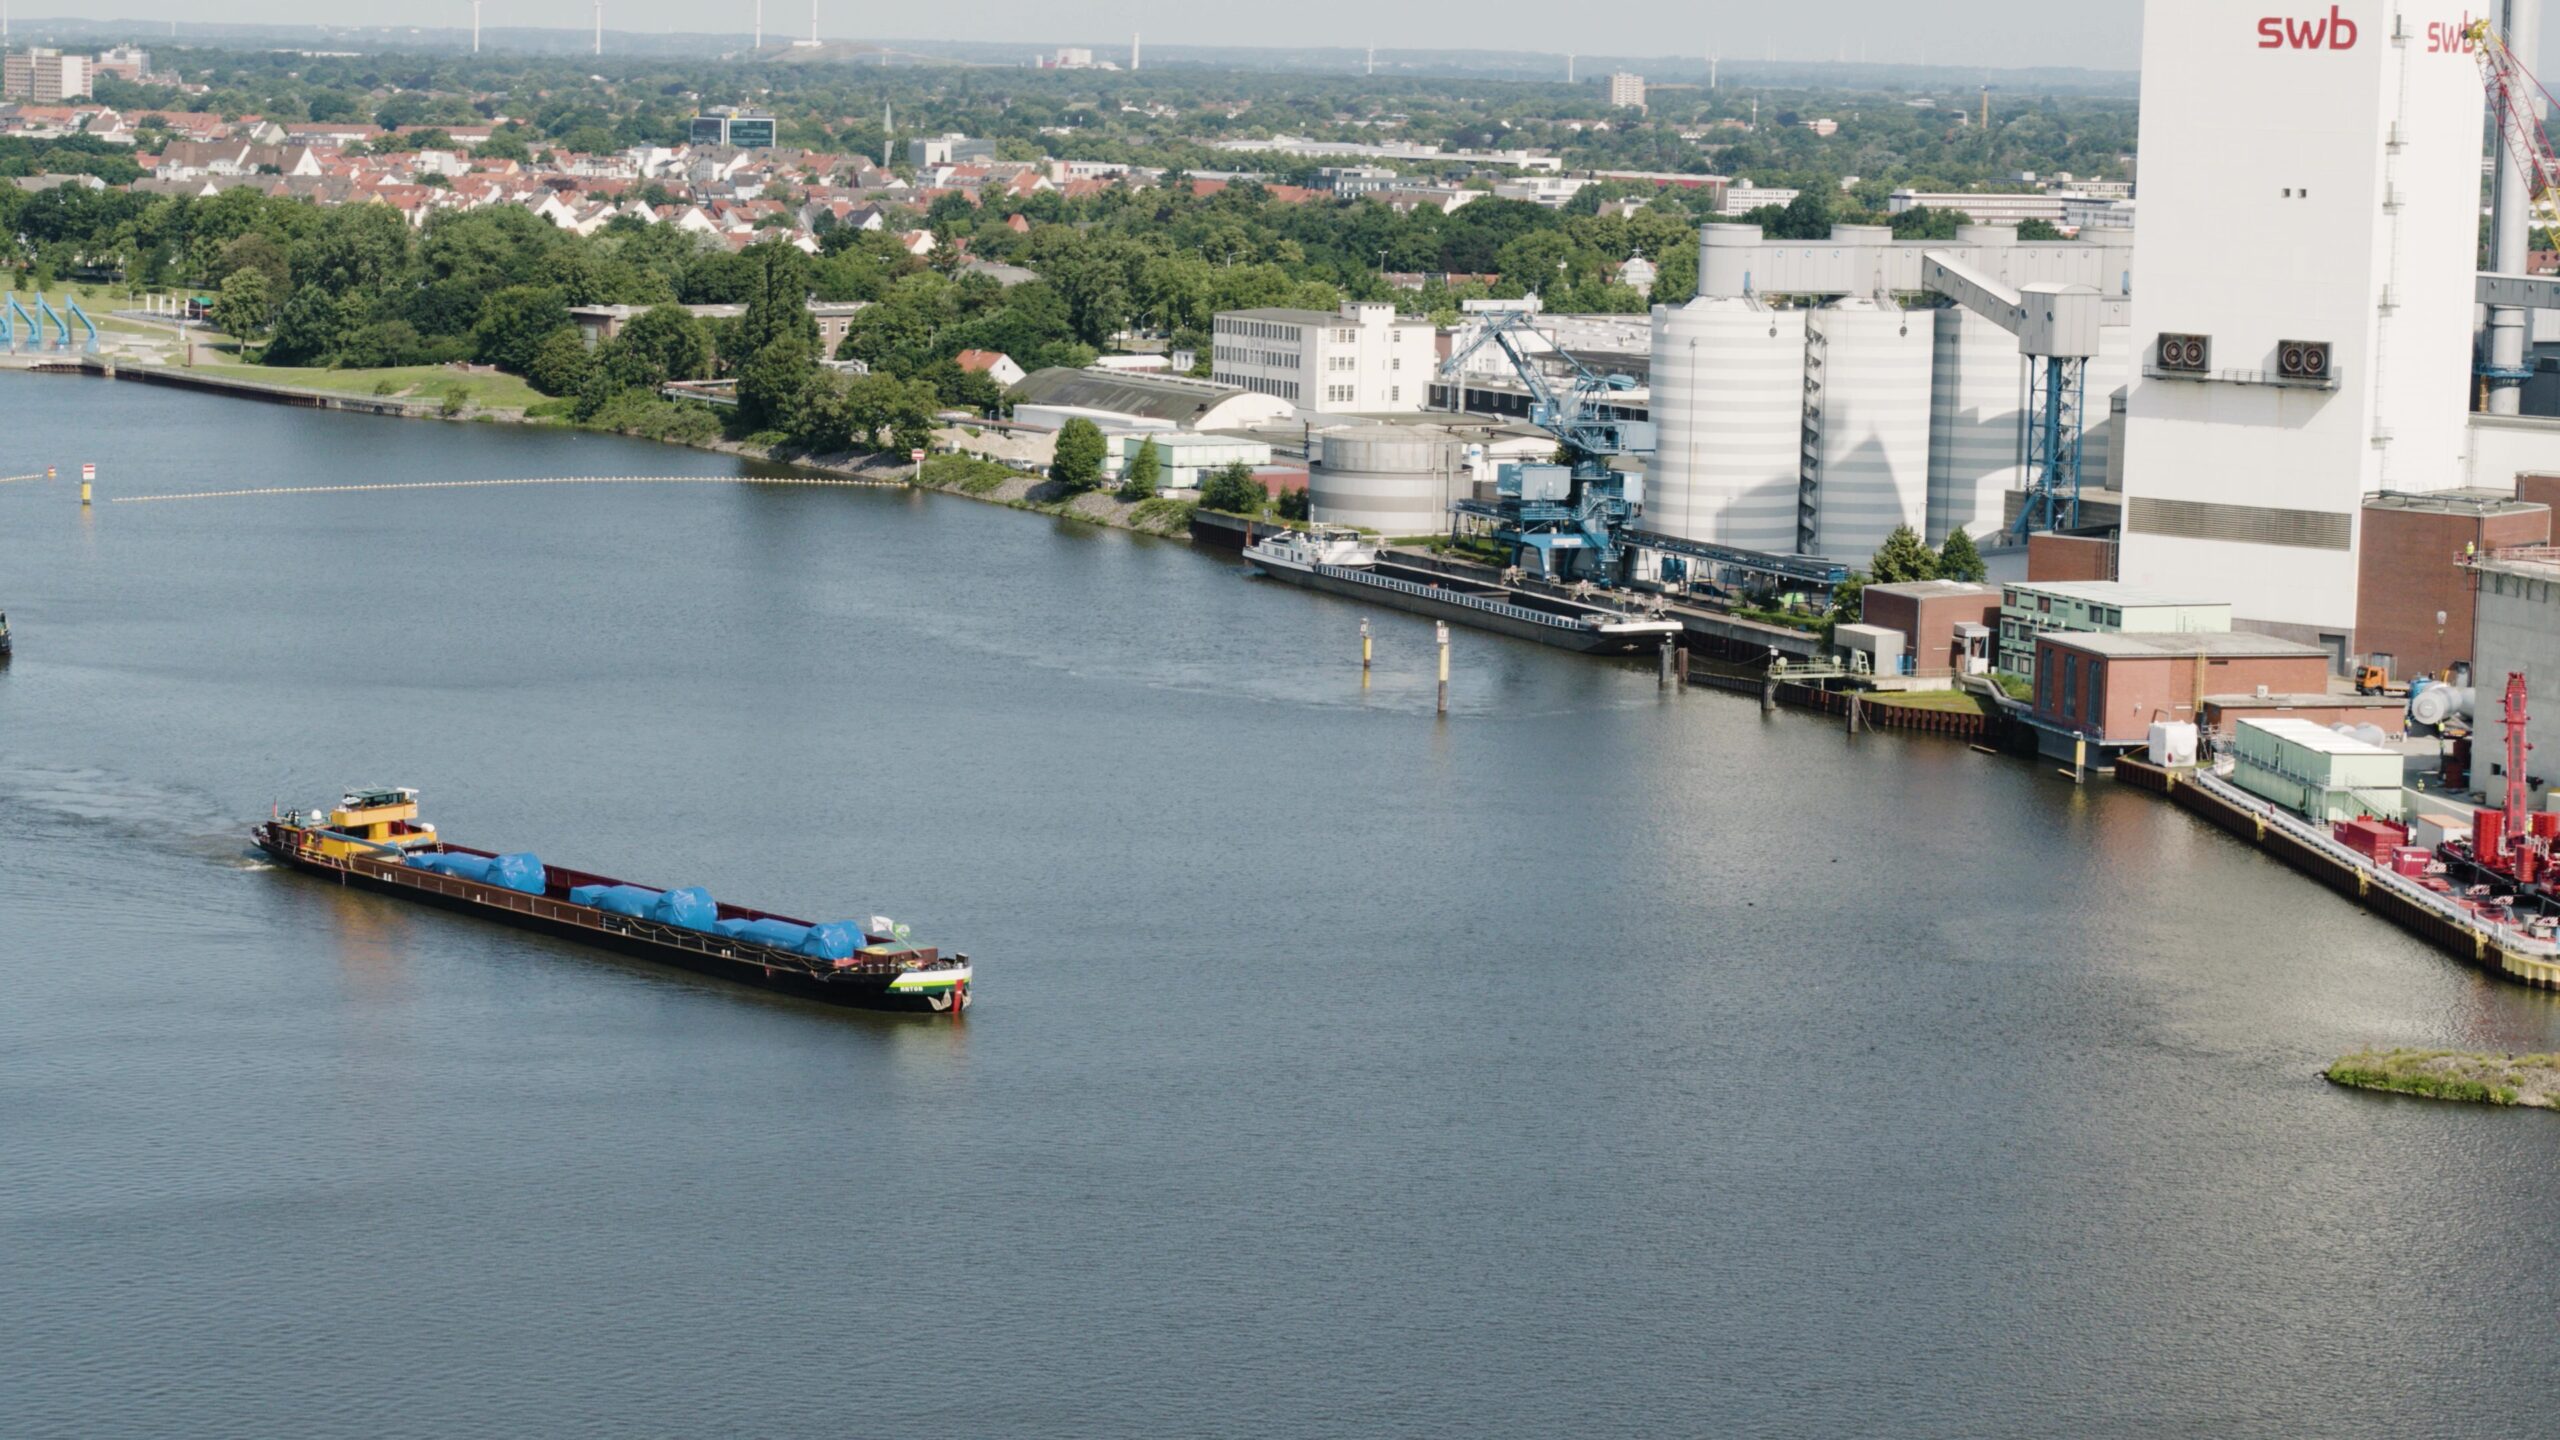 Barge with three gensets on river Weser - Bremen, Germany